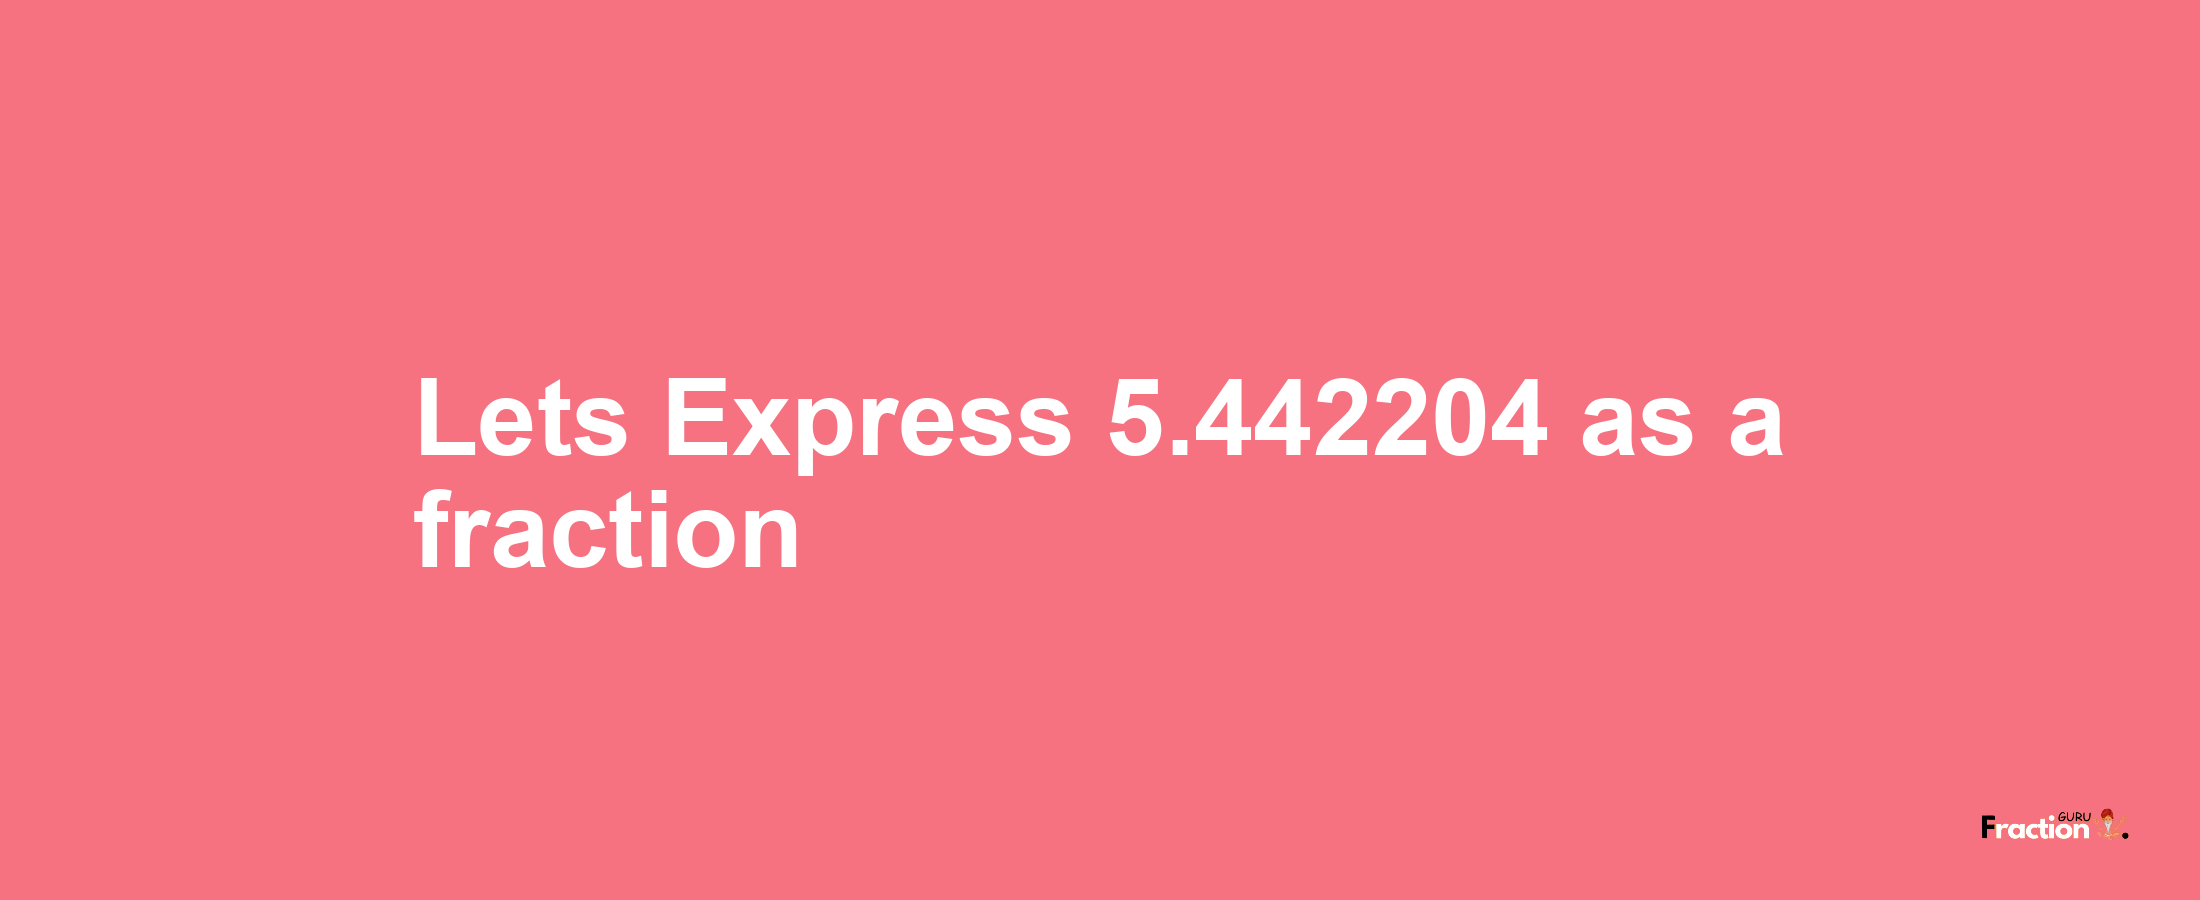 Lets Express 5.442204 as afraction